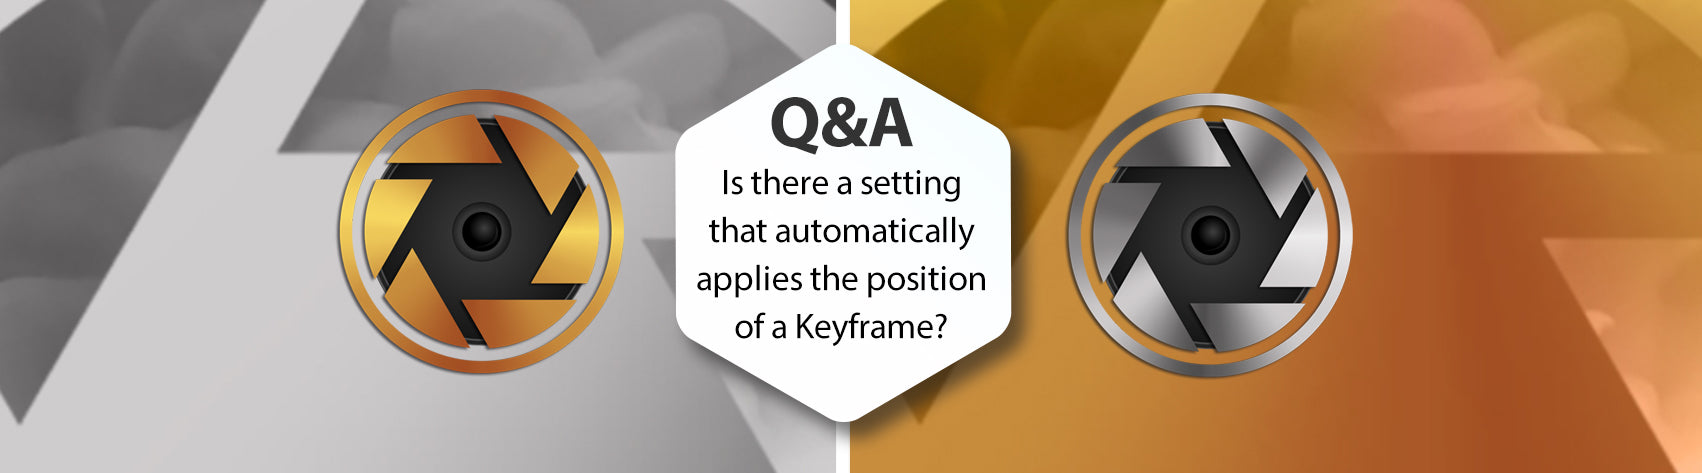 Q&A - Is there a setting that automatically applies the position of a Keyframe?